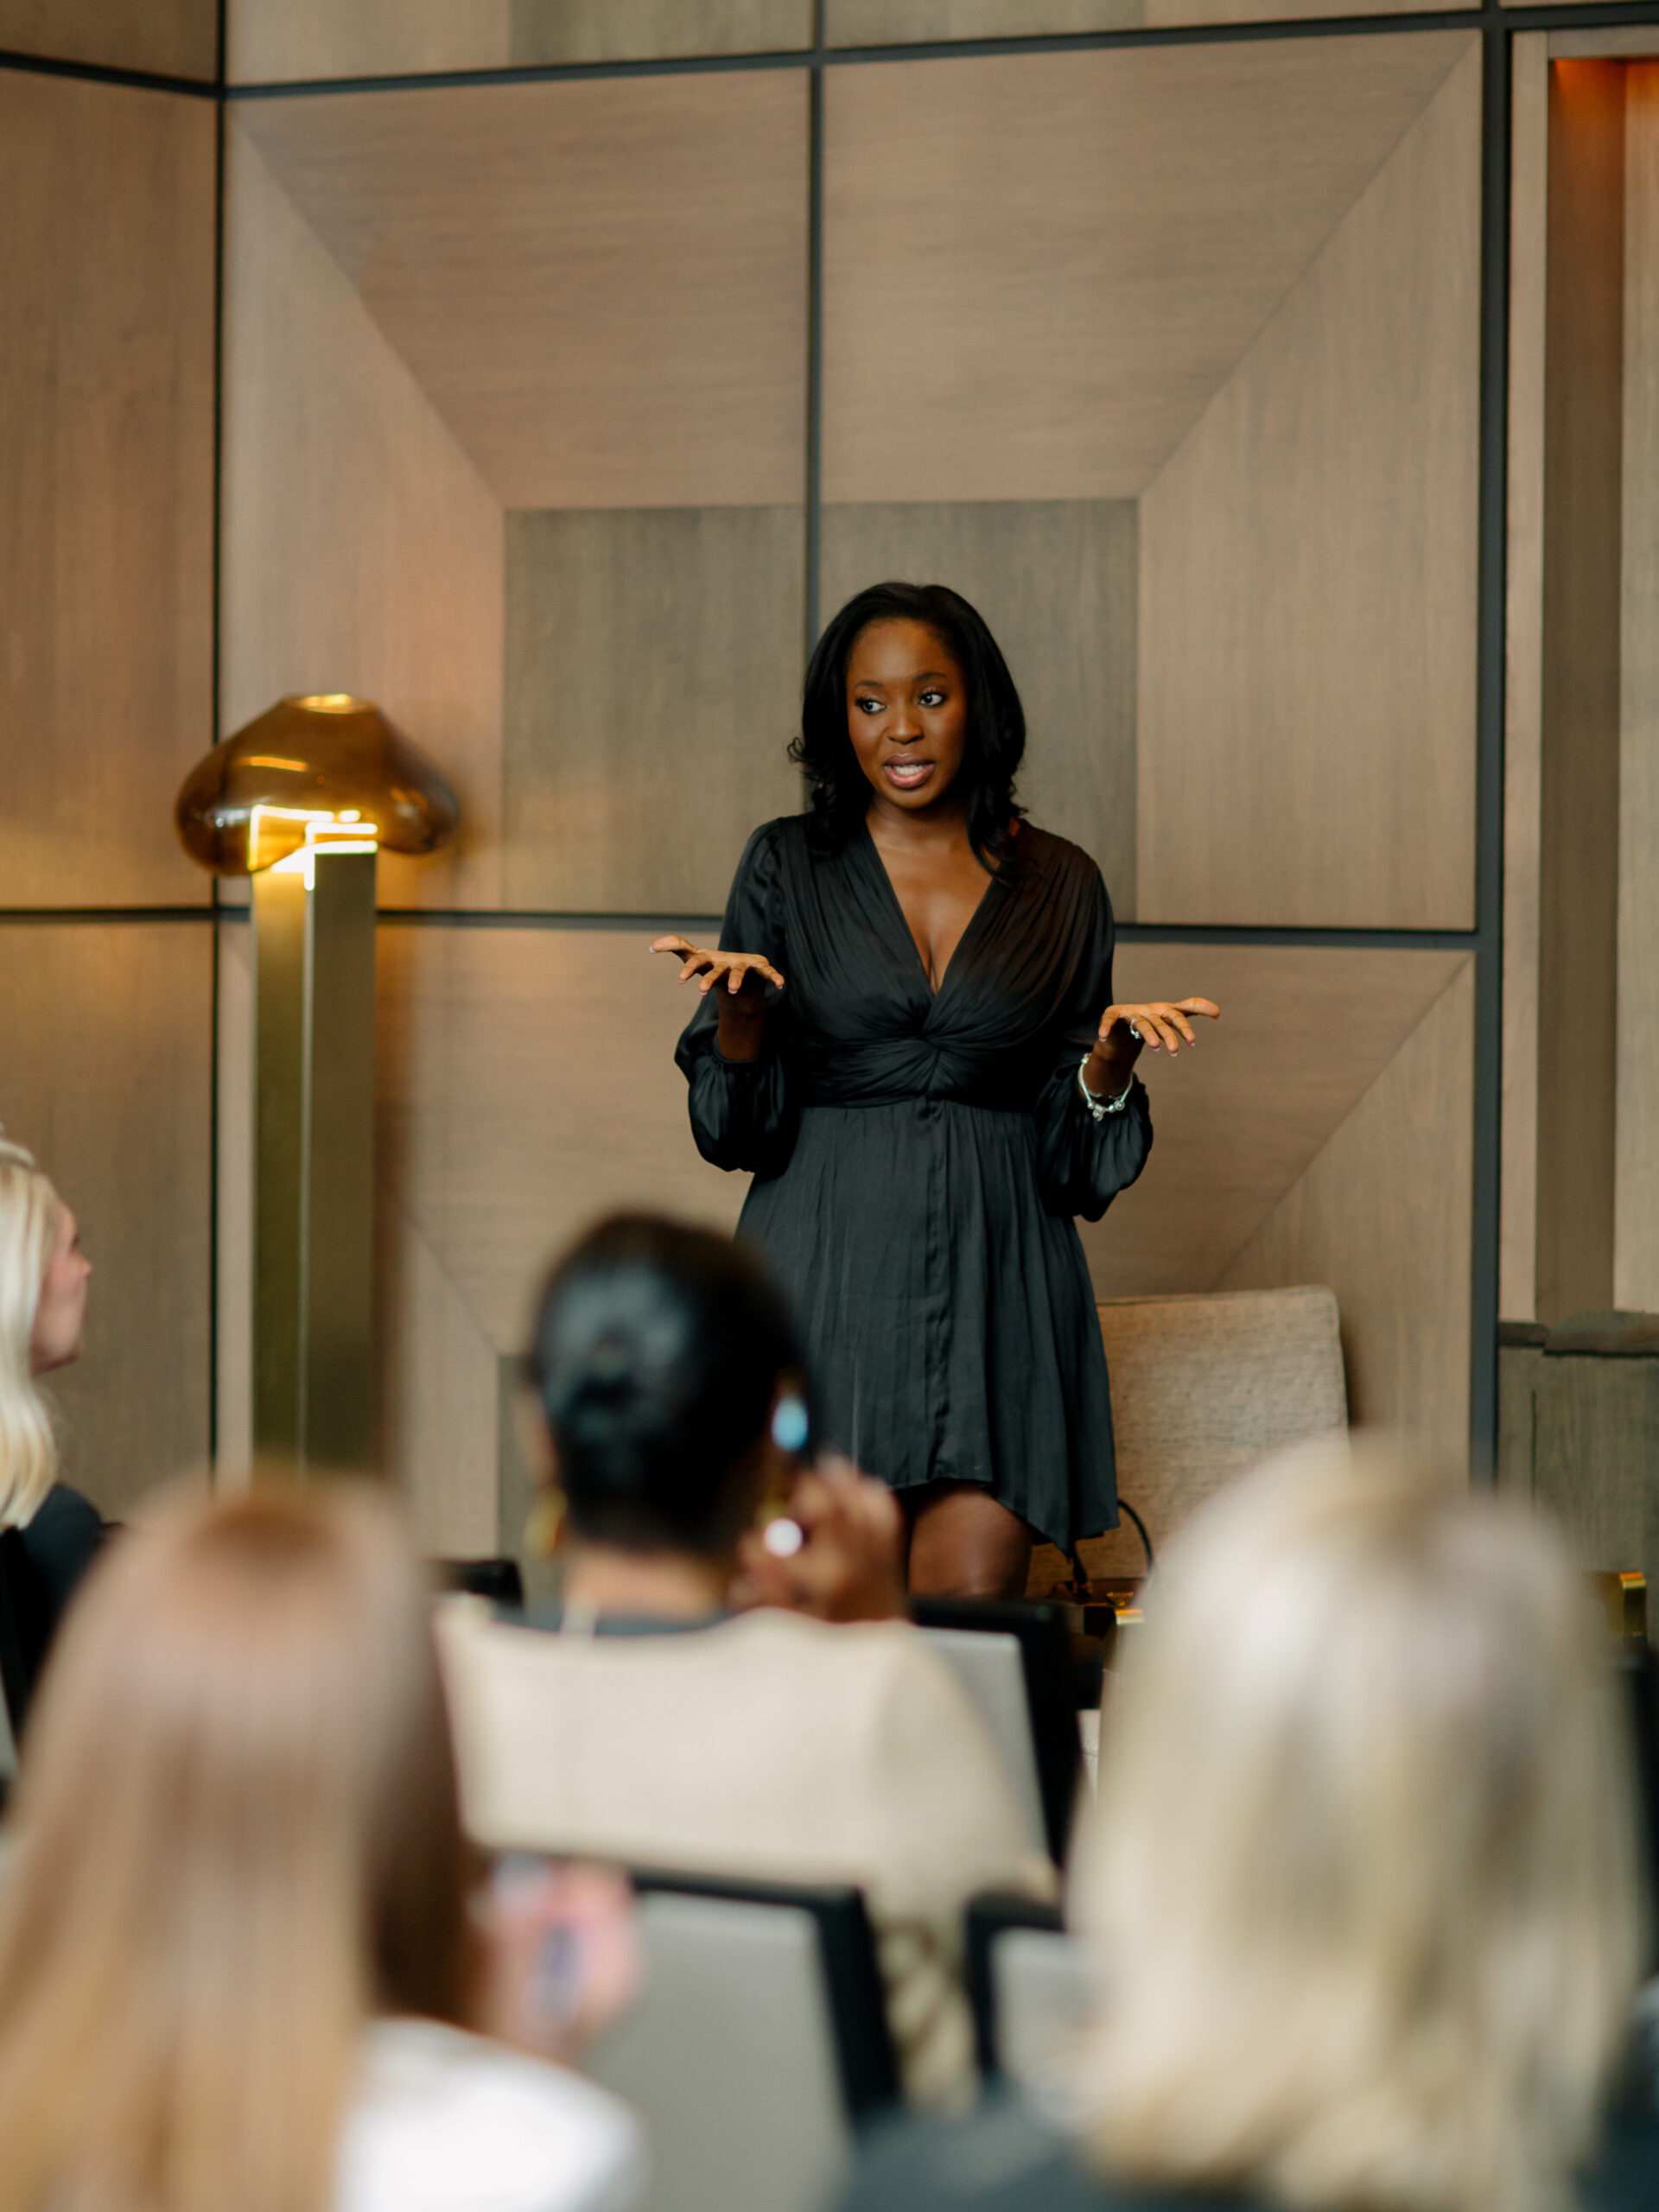 Have a speaking engagement soon? Not sure how to prepare? CLICK HERE to see my top tips to prepare for a speaking engagement like a pro!